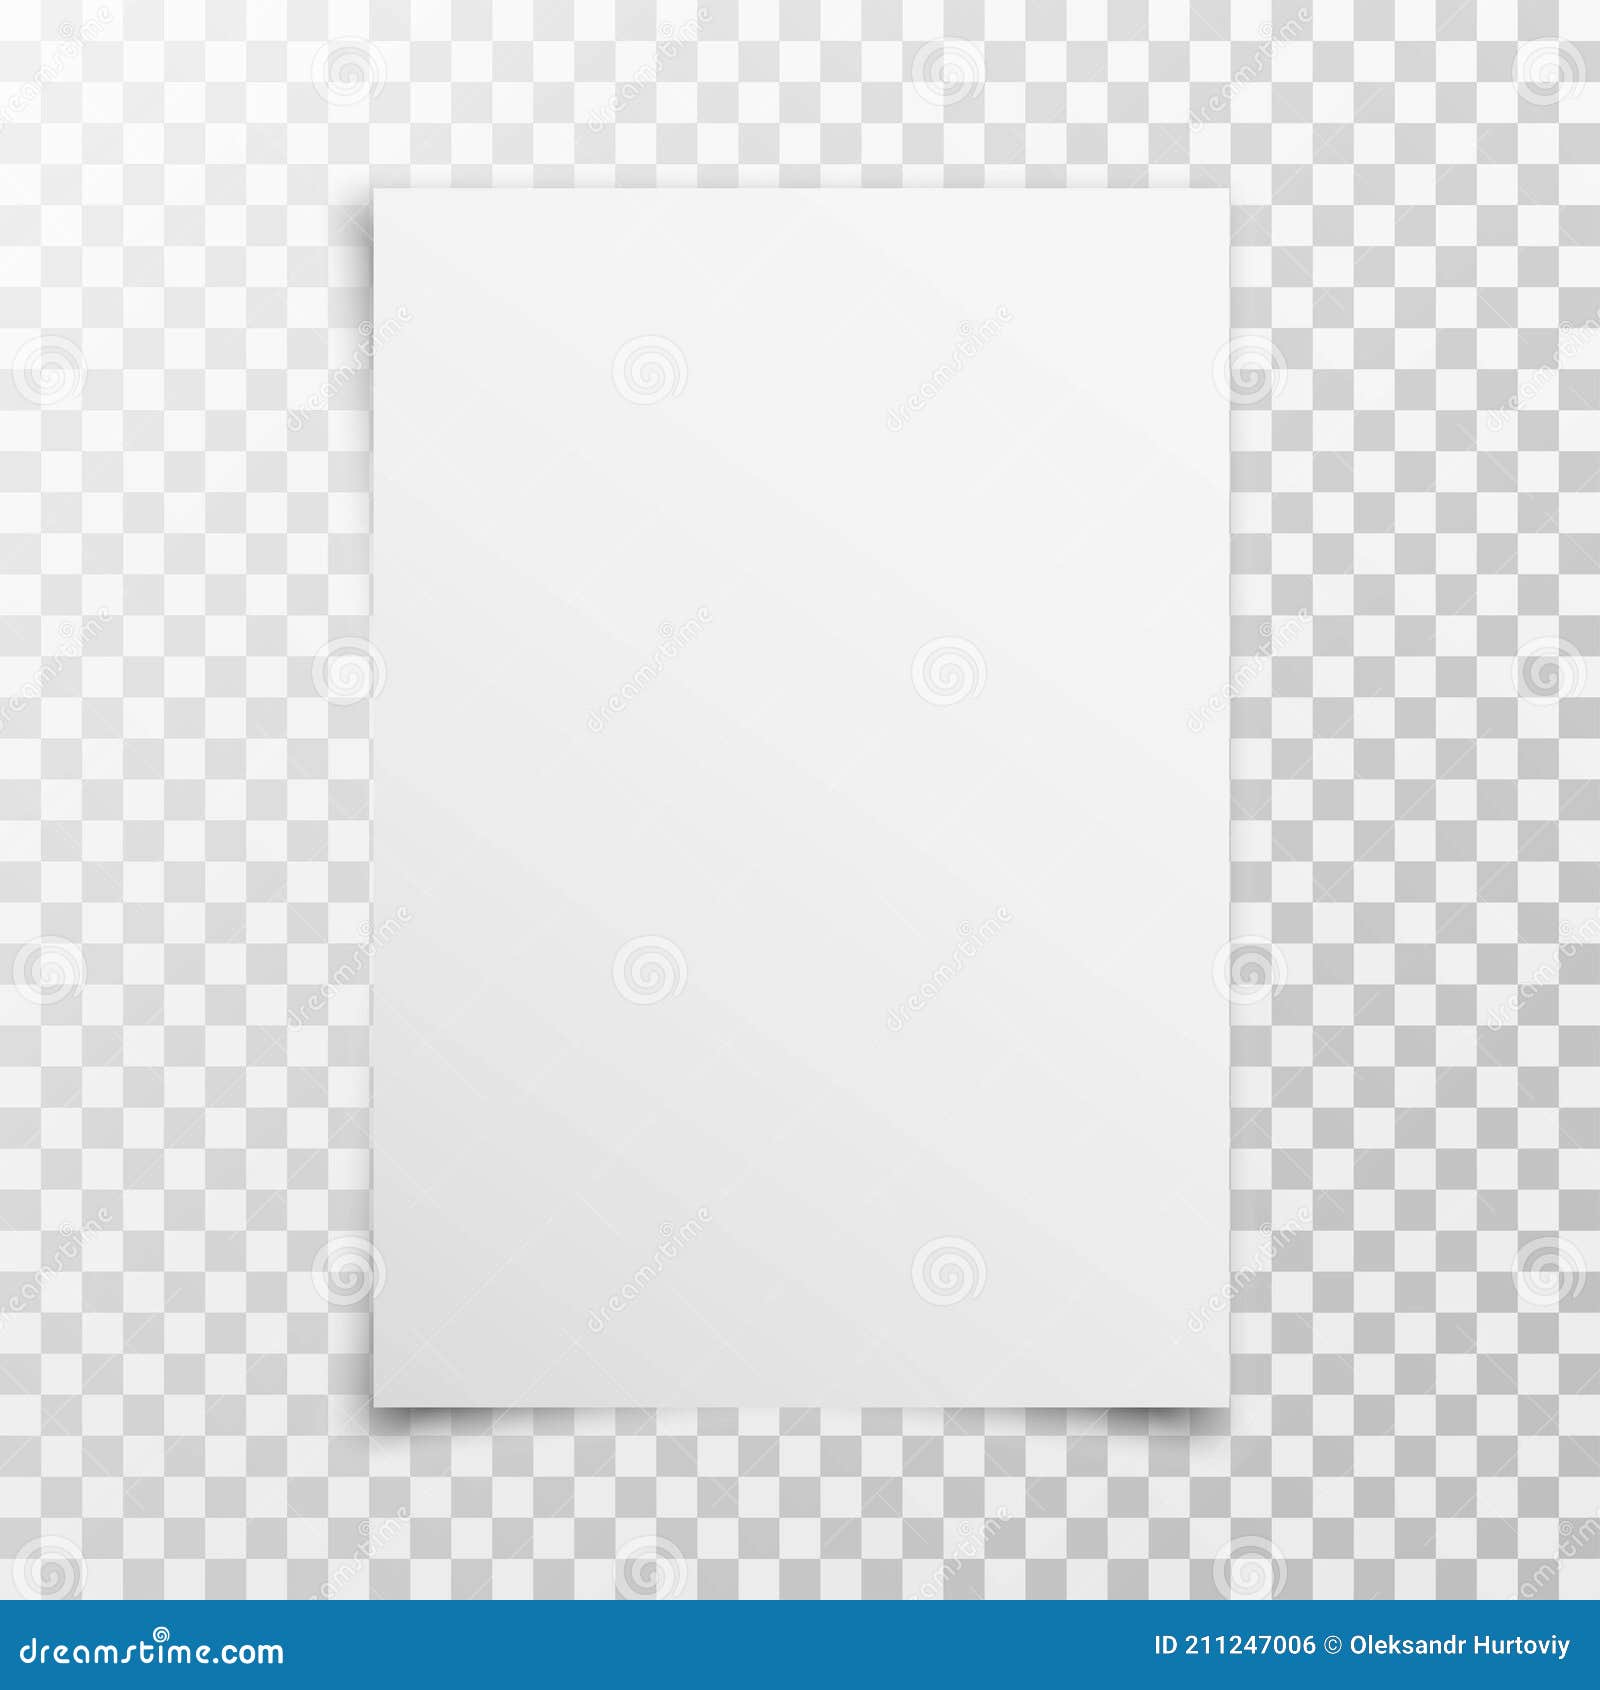 White Realistic Blank Paper Page with Shadow Isolated on Transparent  Background. A4 Size Sheet Paper Stock Vector - Illustration of modern,  clean: 211247006